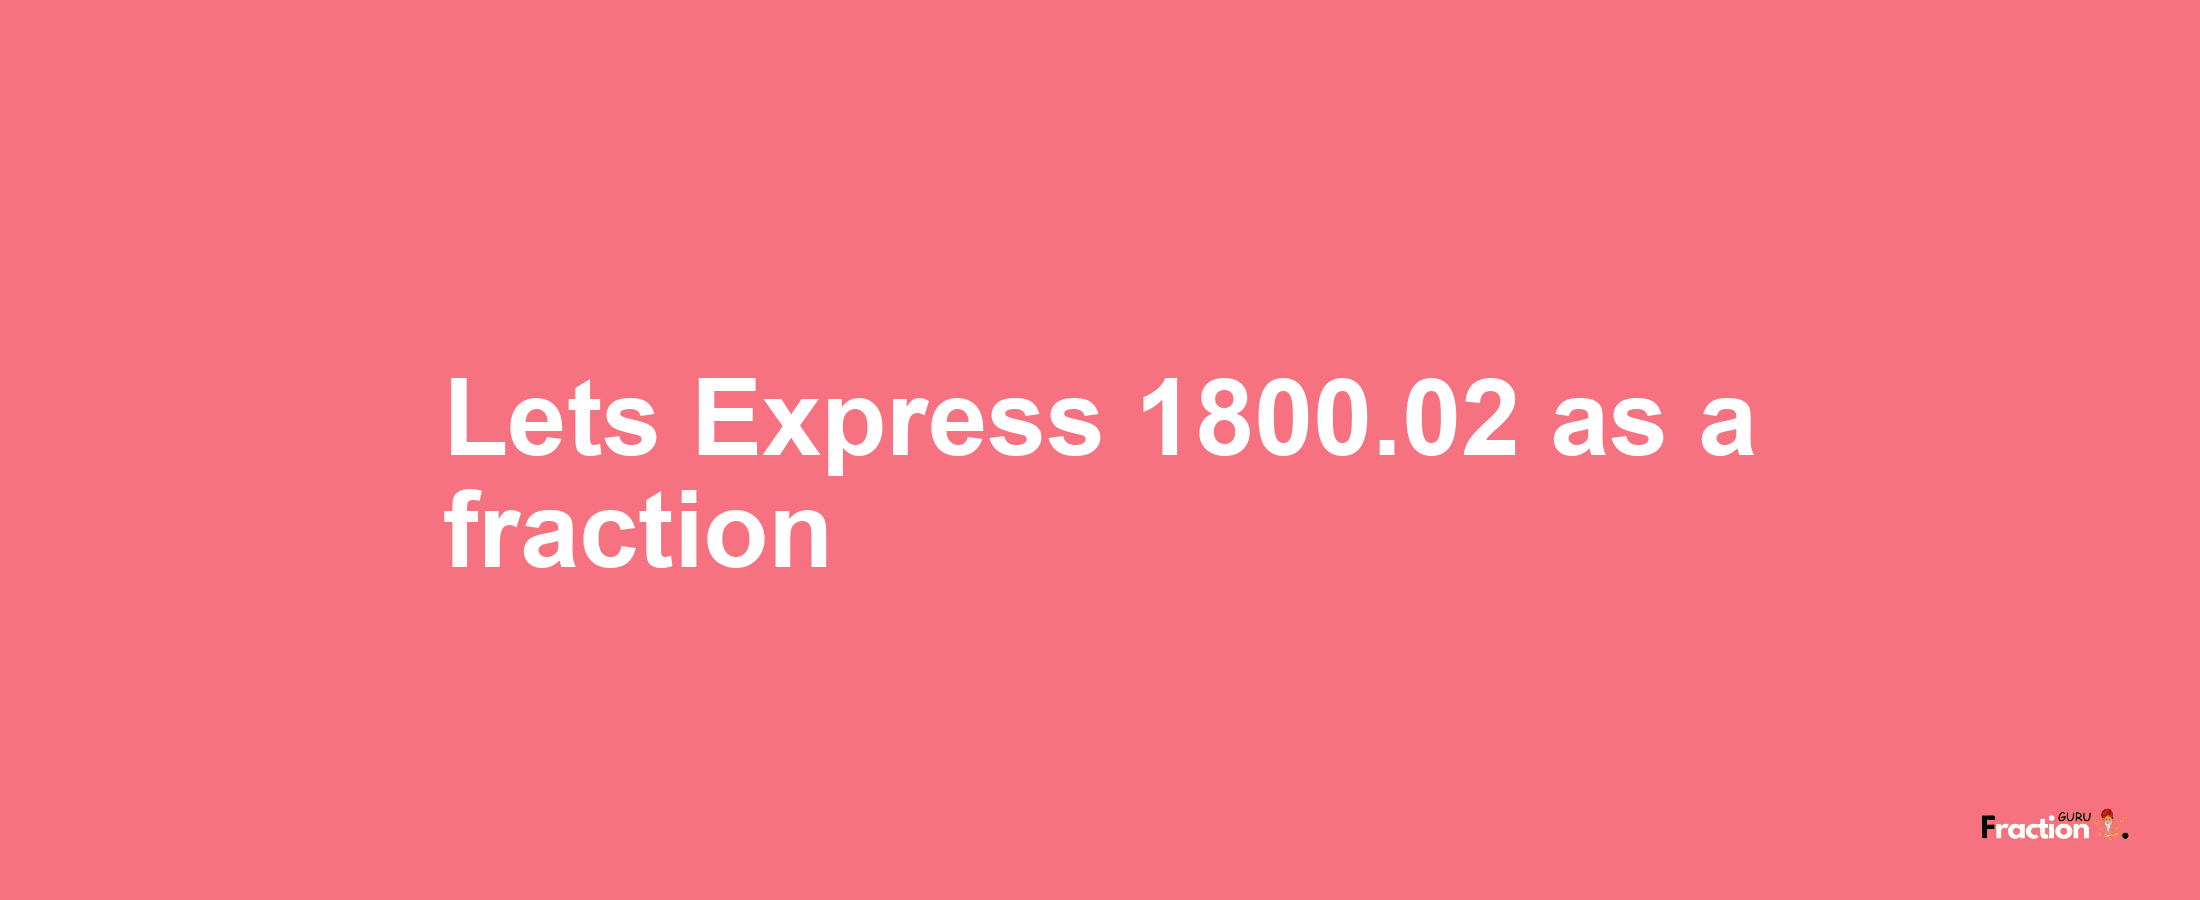 Lets Express 1800.02 as afraction